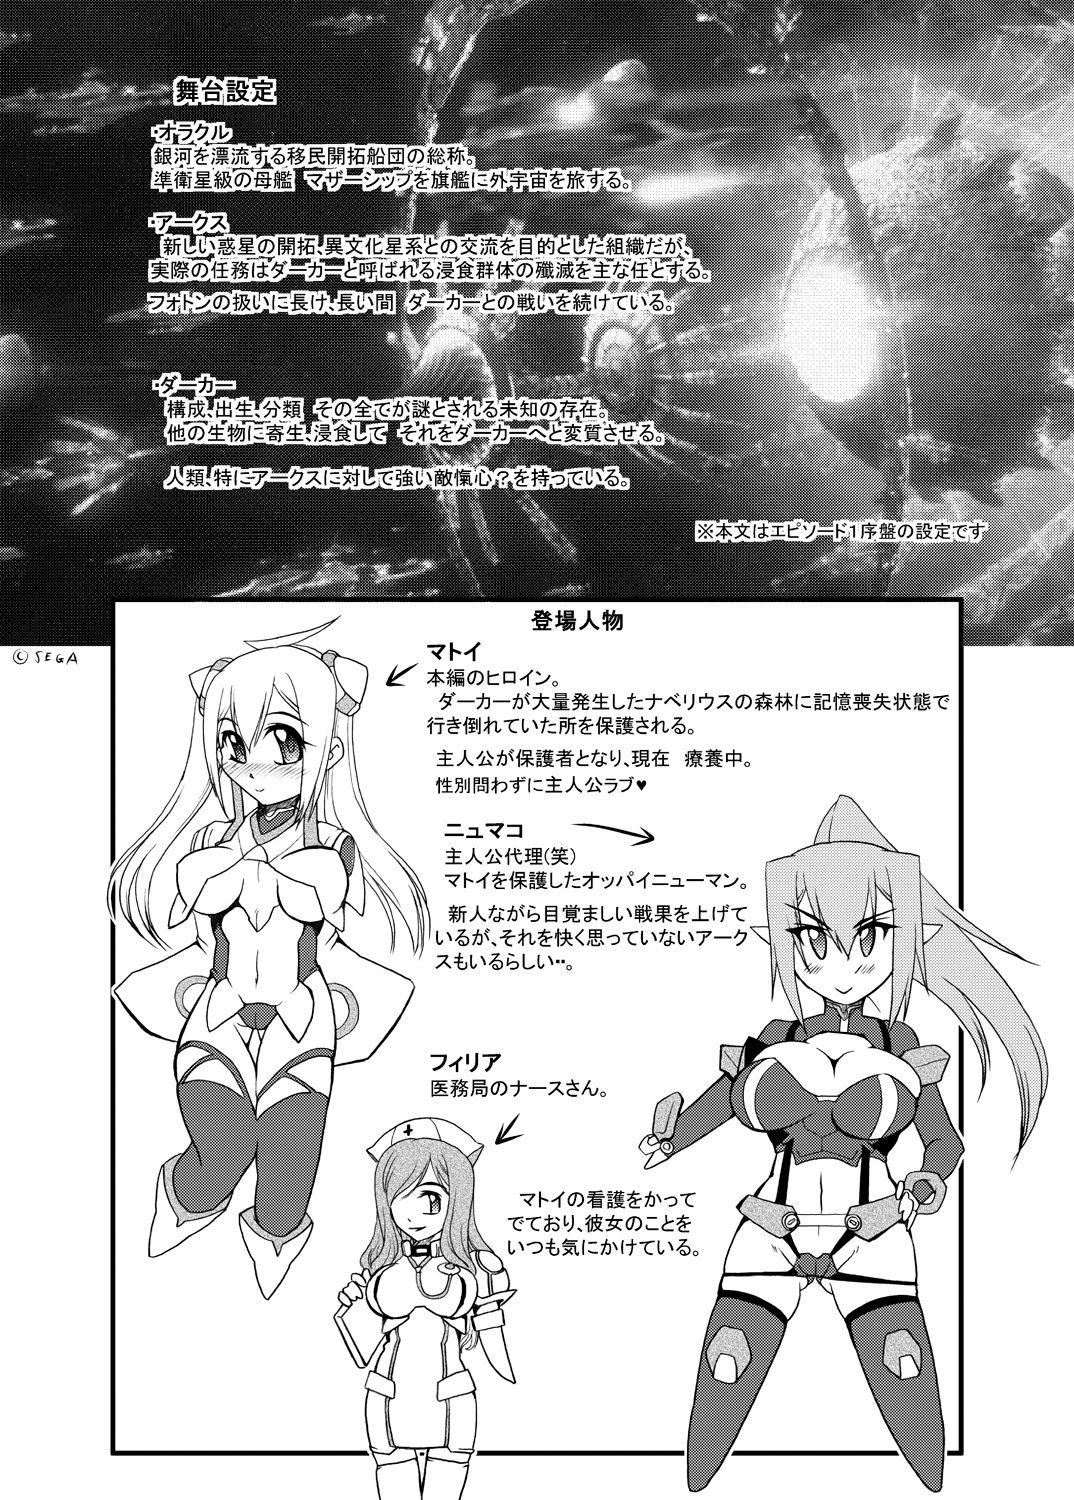 Indonesia MATTER BOARD X - Phantasy star online 2 Bed - Page 4